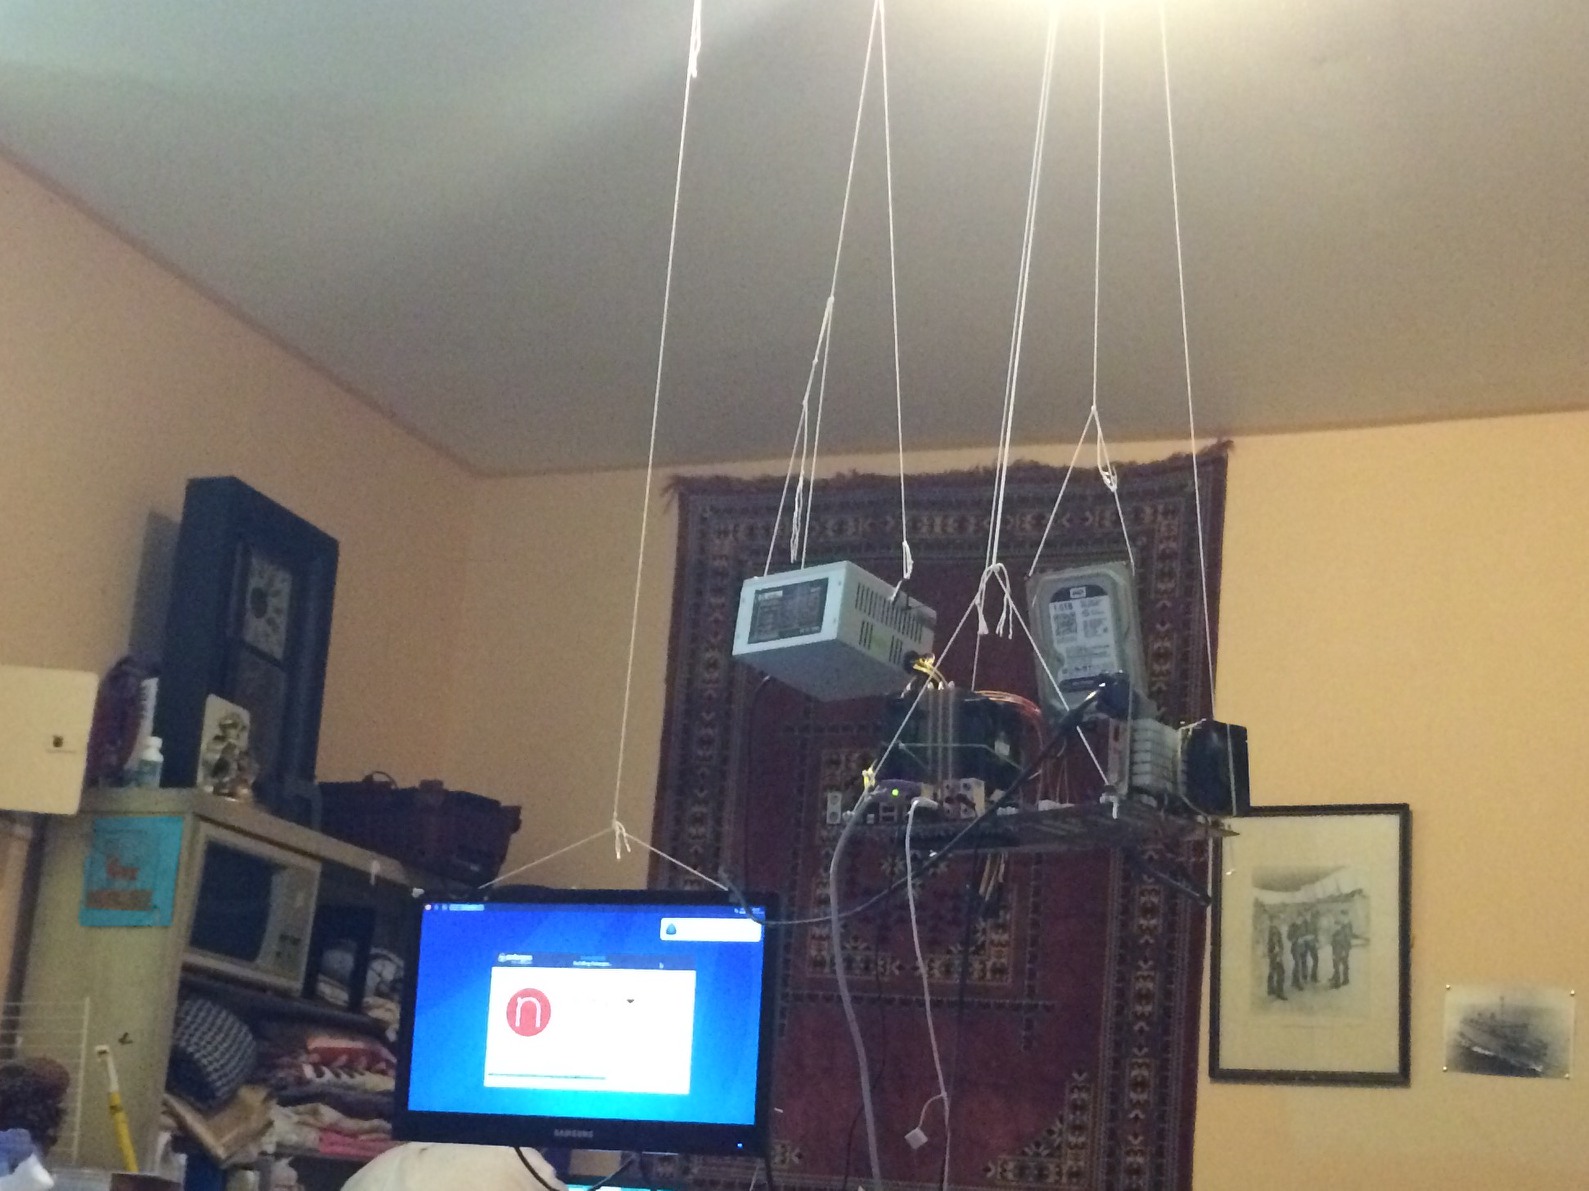 This computer is suspended by string to the ceiling. Eureka!